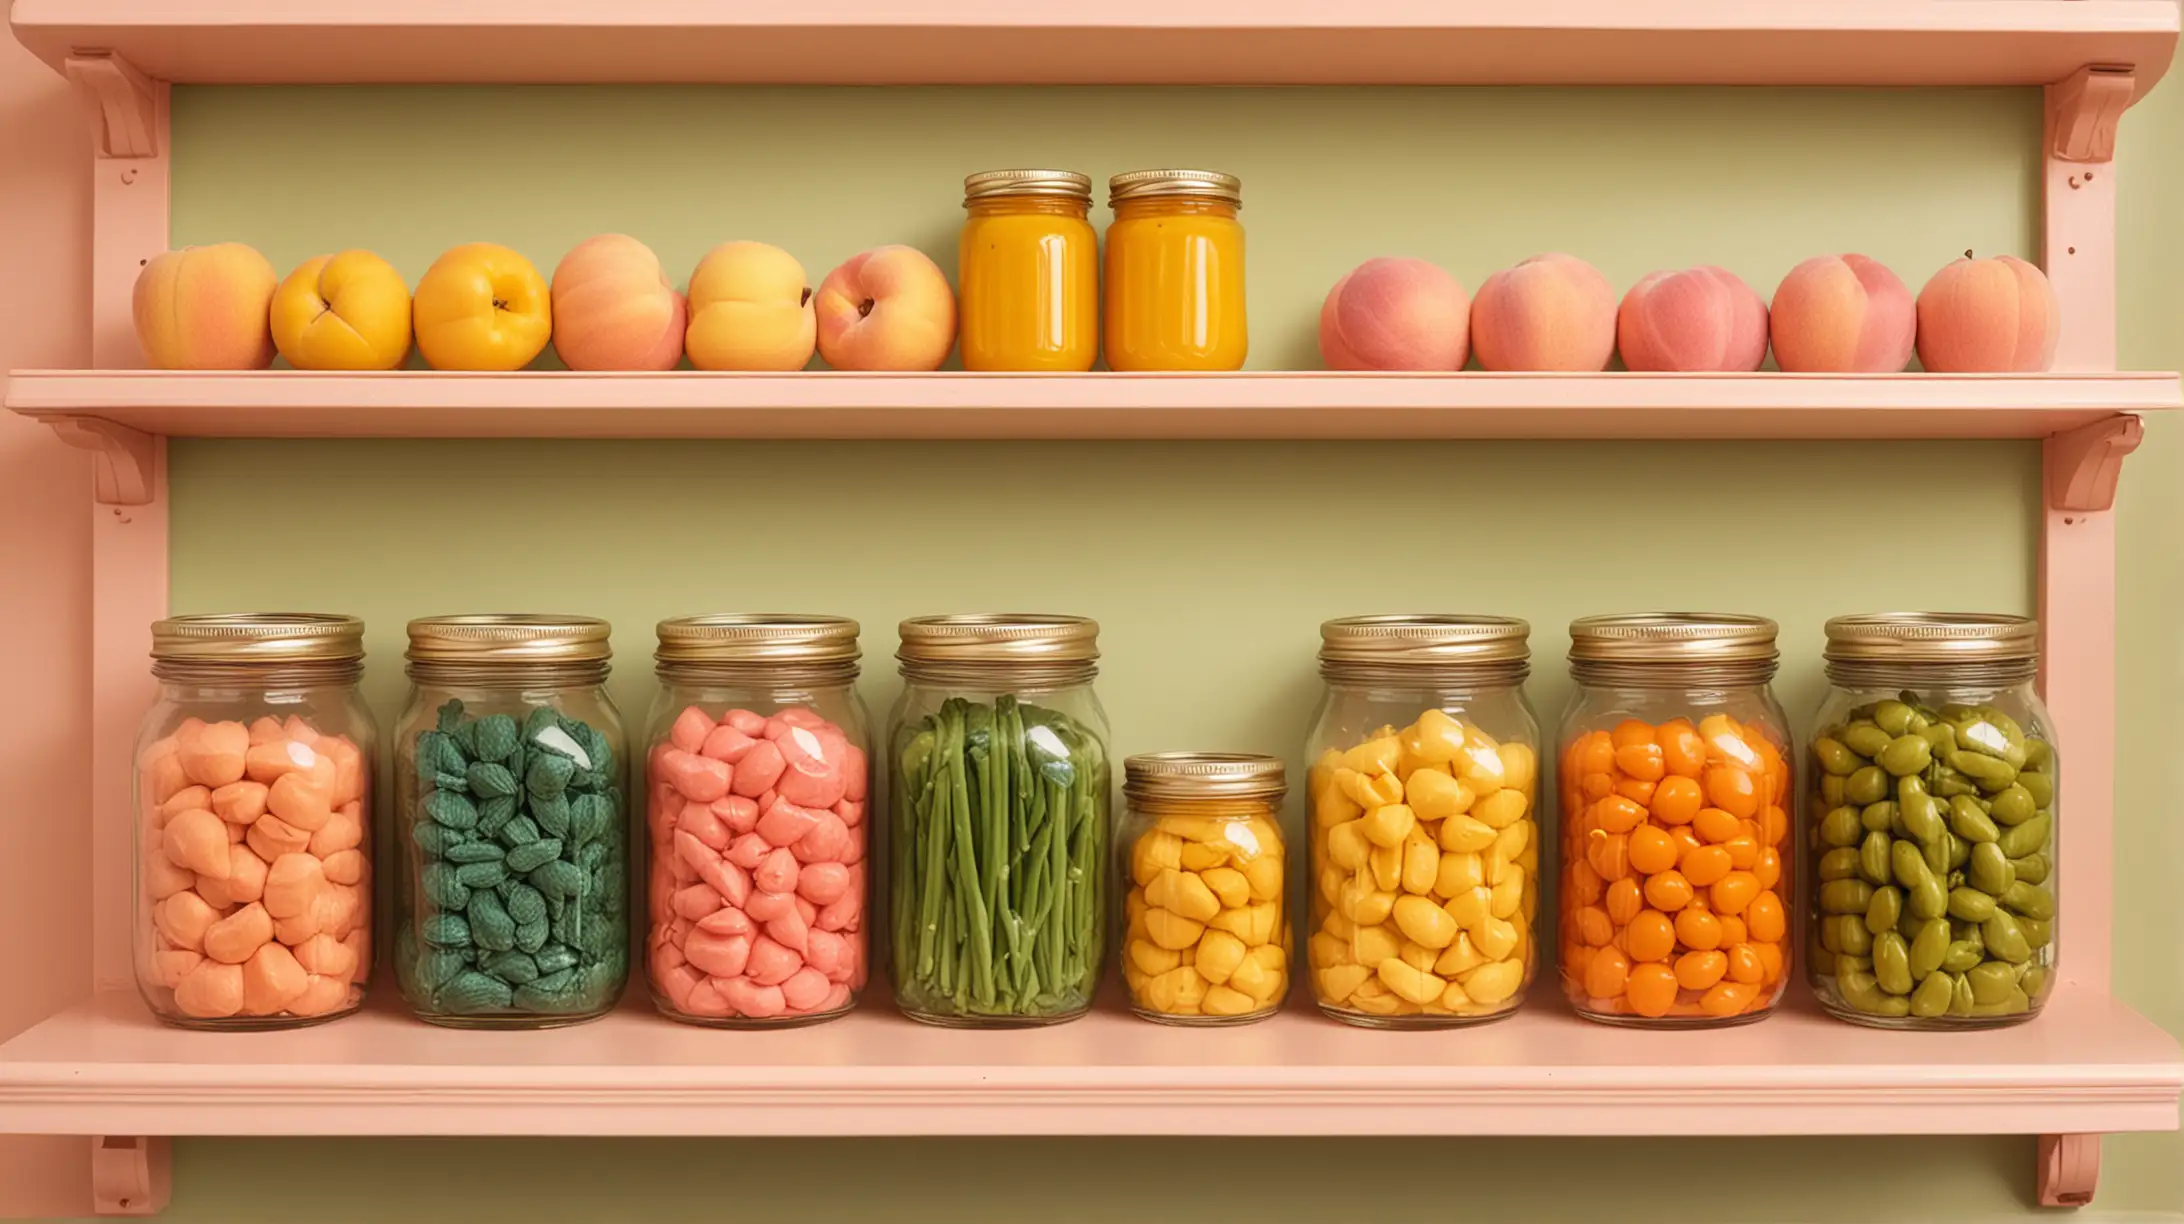 Wes Anderson Inspired Preserved Foods Display Retro Charm in Green Yellow and Red Jars on PeachColored Shelf